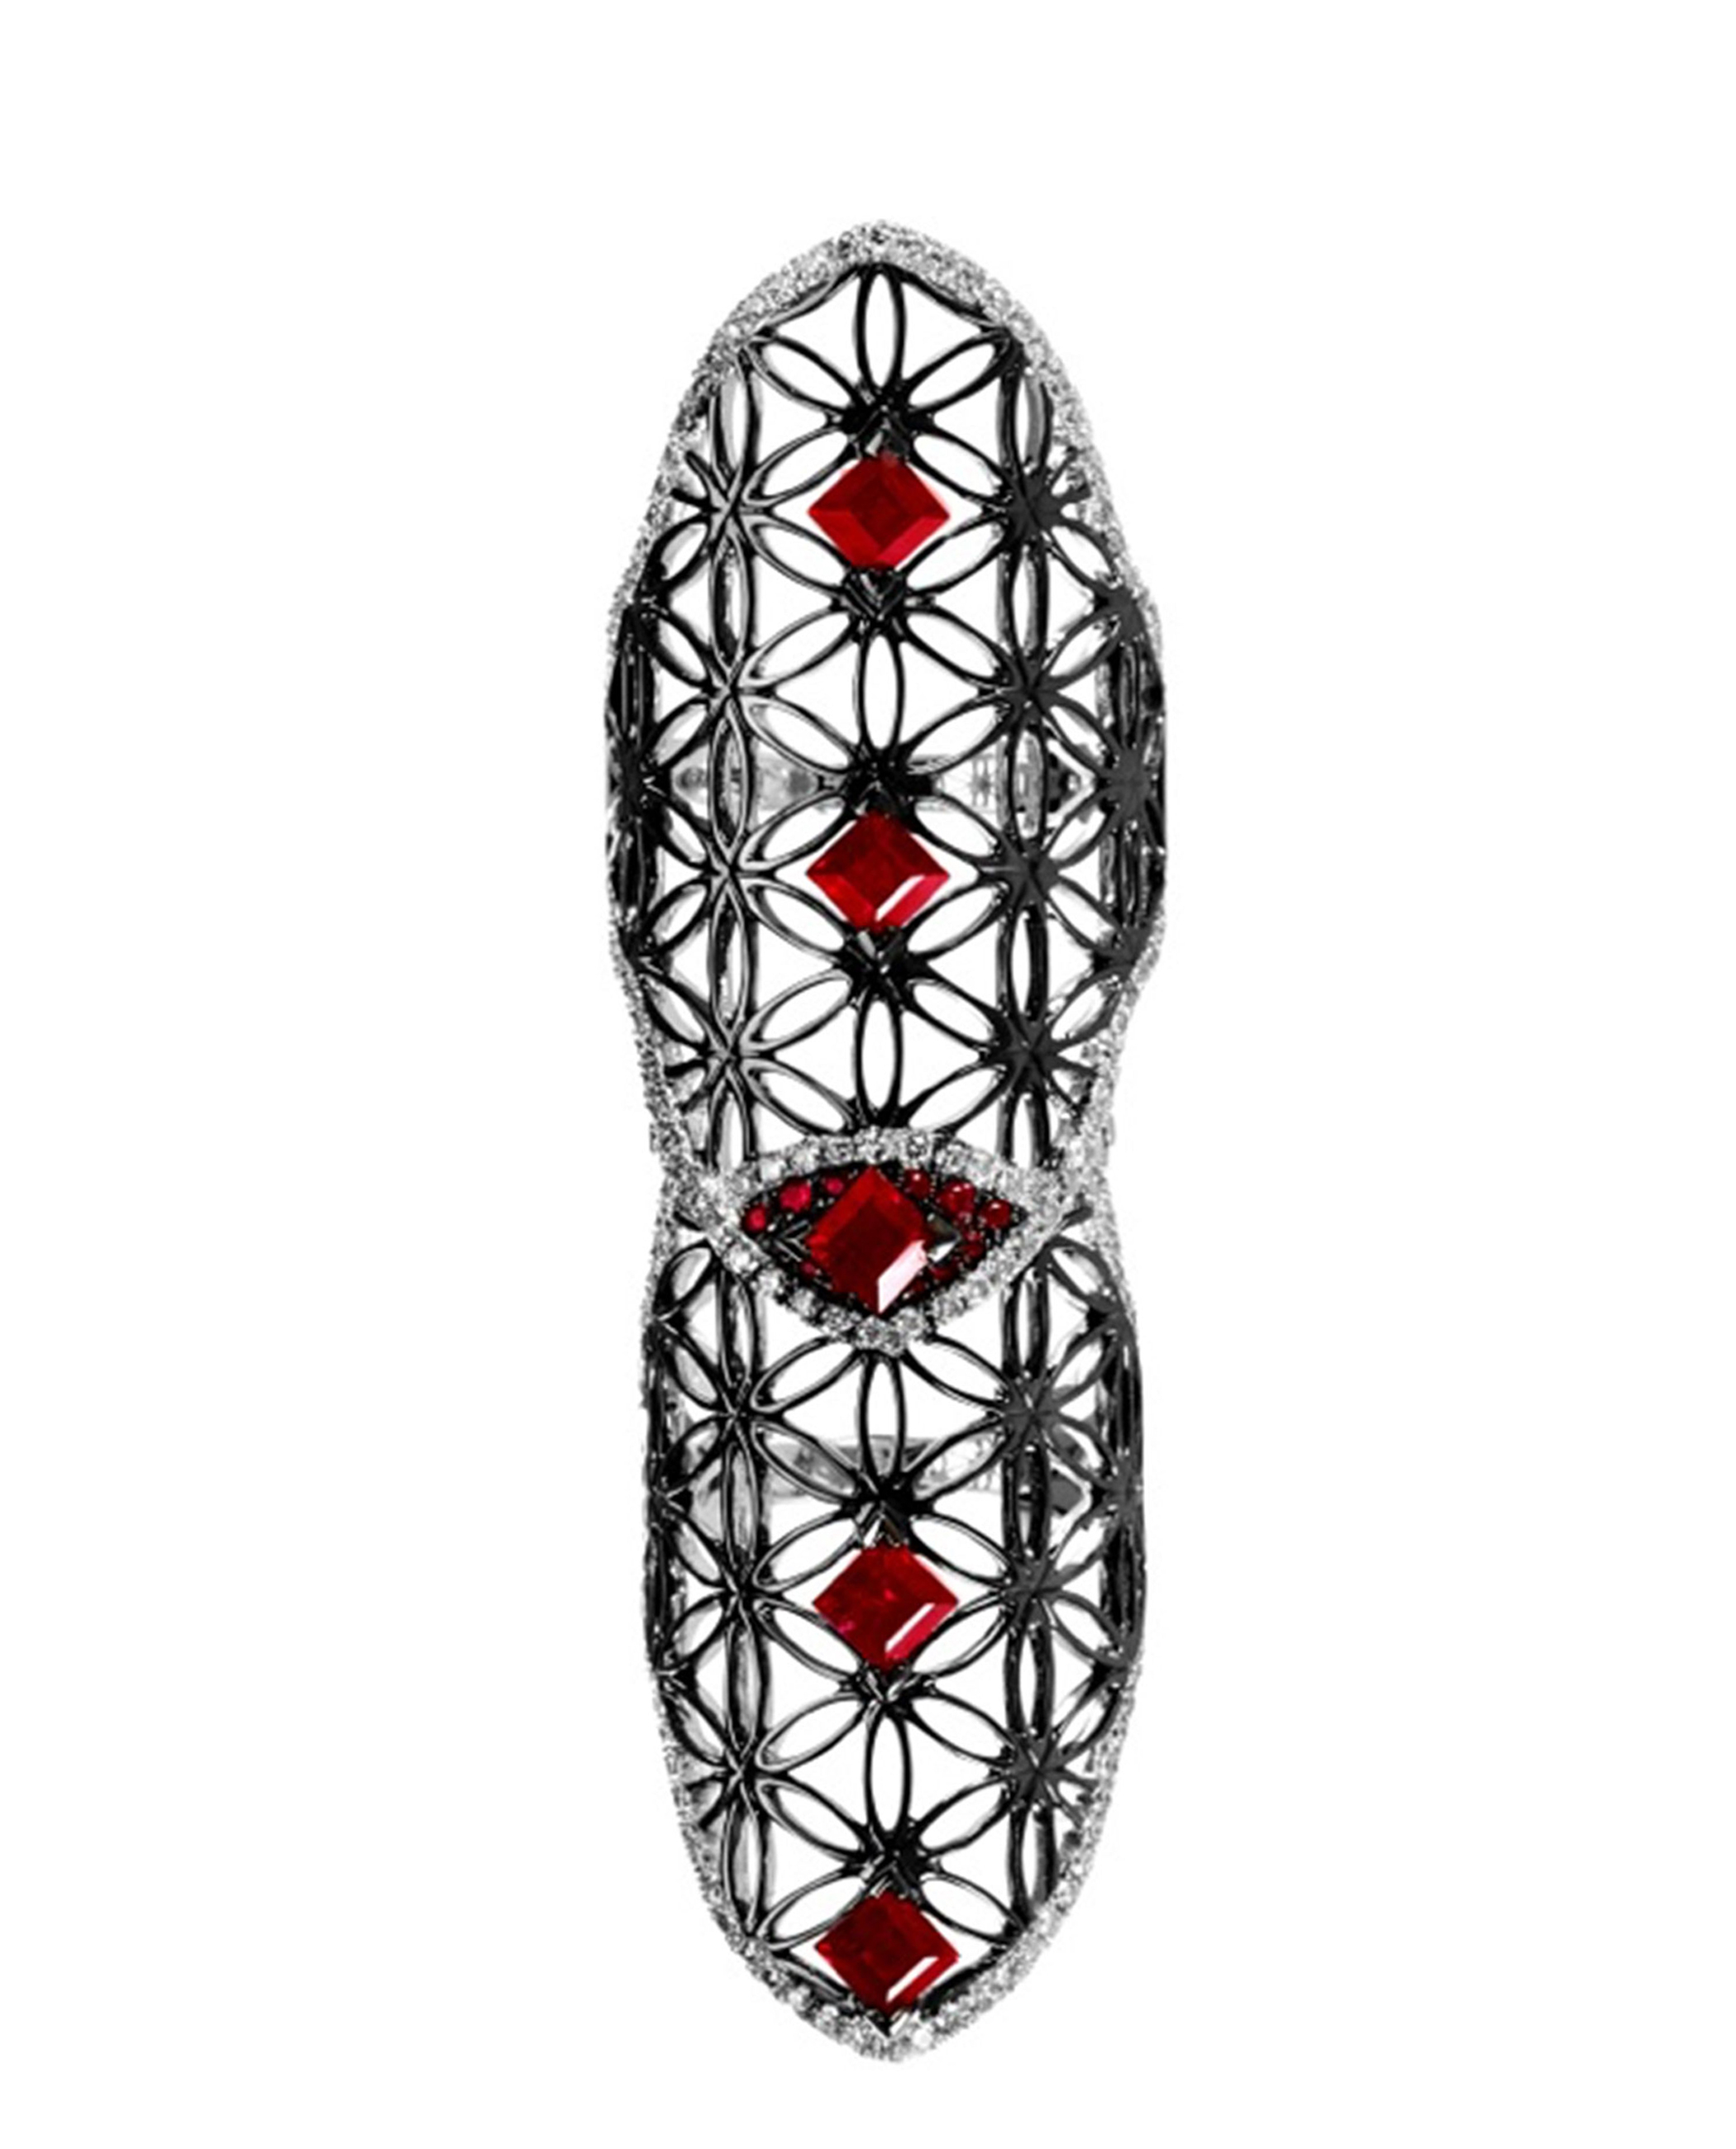 Dionea orcini 18k Gold Semiramis Double Ring With Rubies in Black ...  